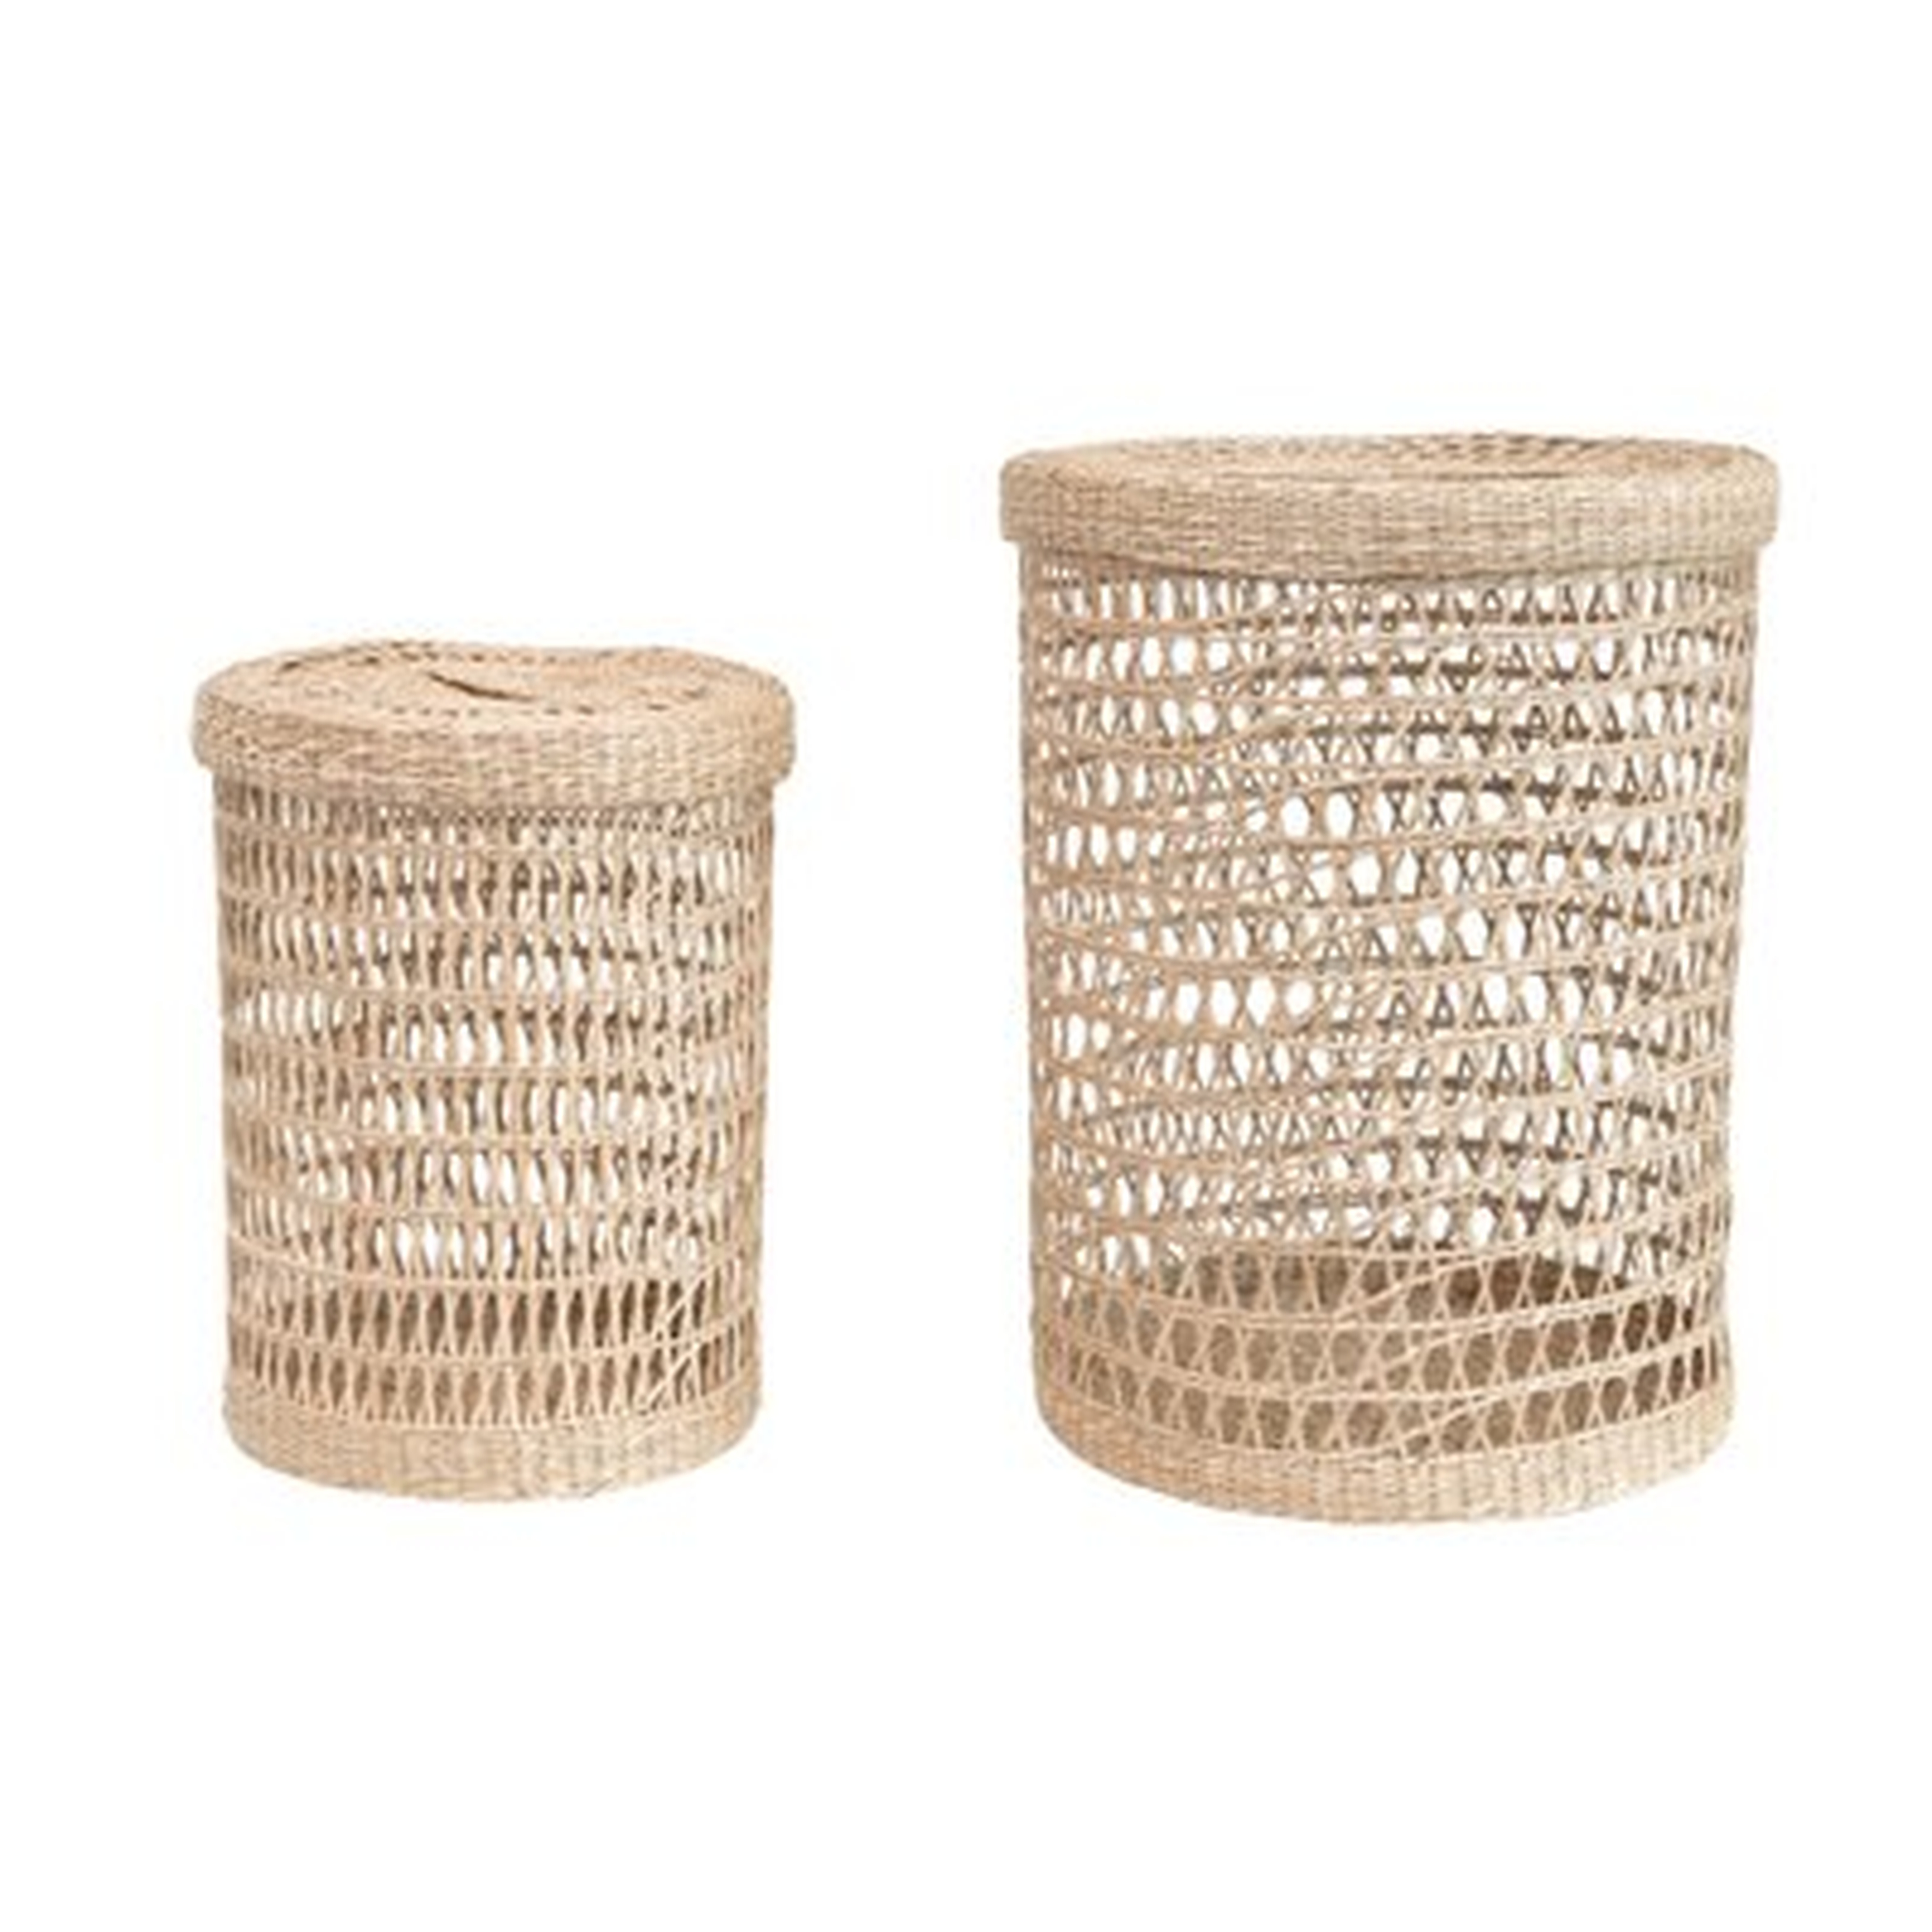 Hand-Woven Seagrass Baskets With Lids, Natural, Set Of 2 - Wayfair